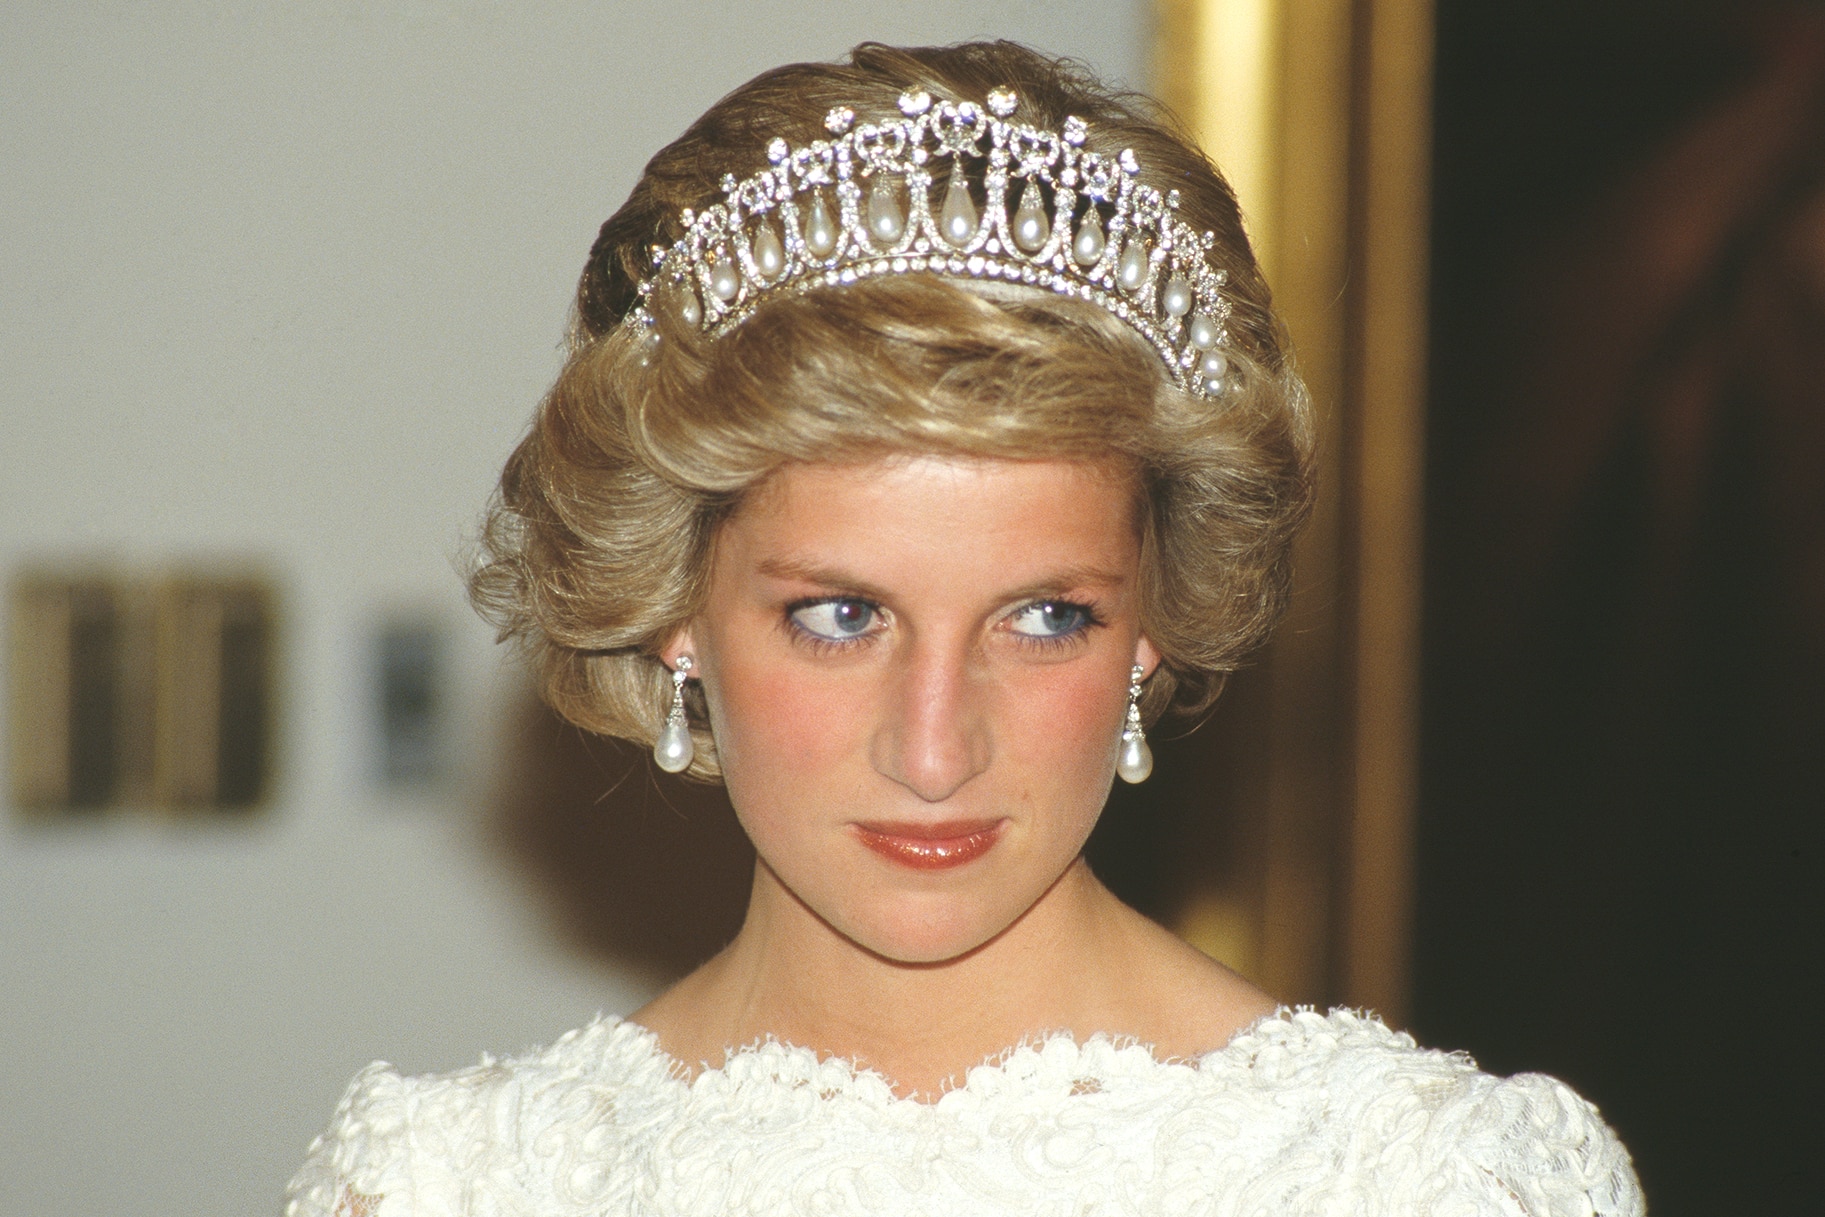 Diana, Princess of Wales in 1985